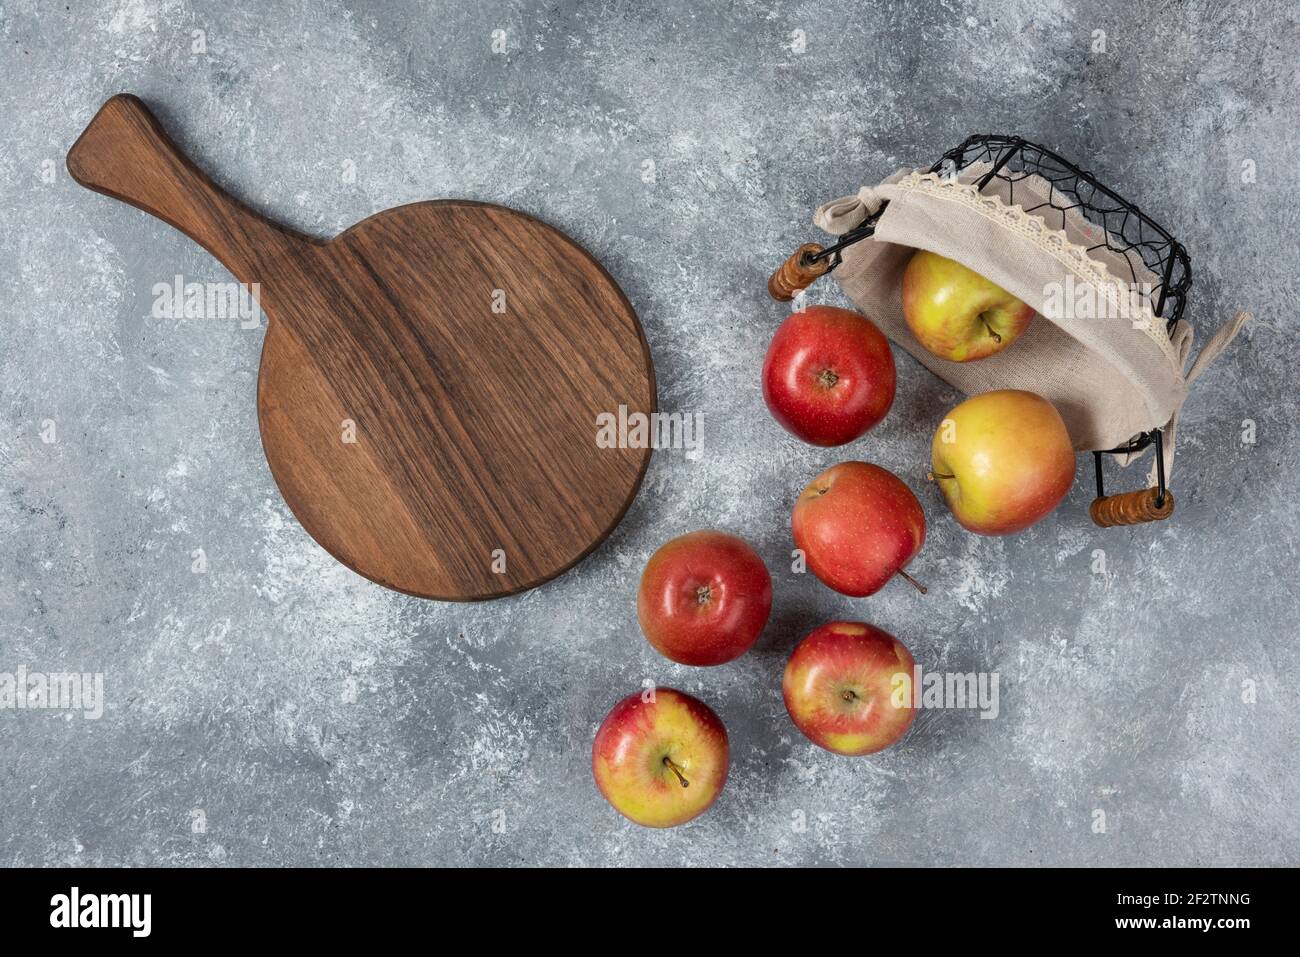 Bunch of fresh ripe apples out of wicker basket on marble surface Stock Photo